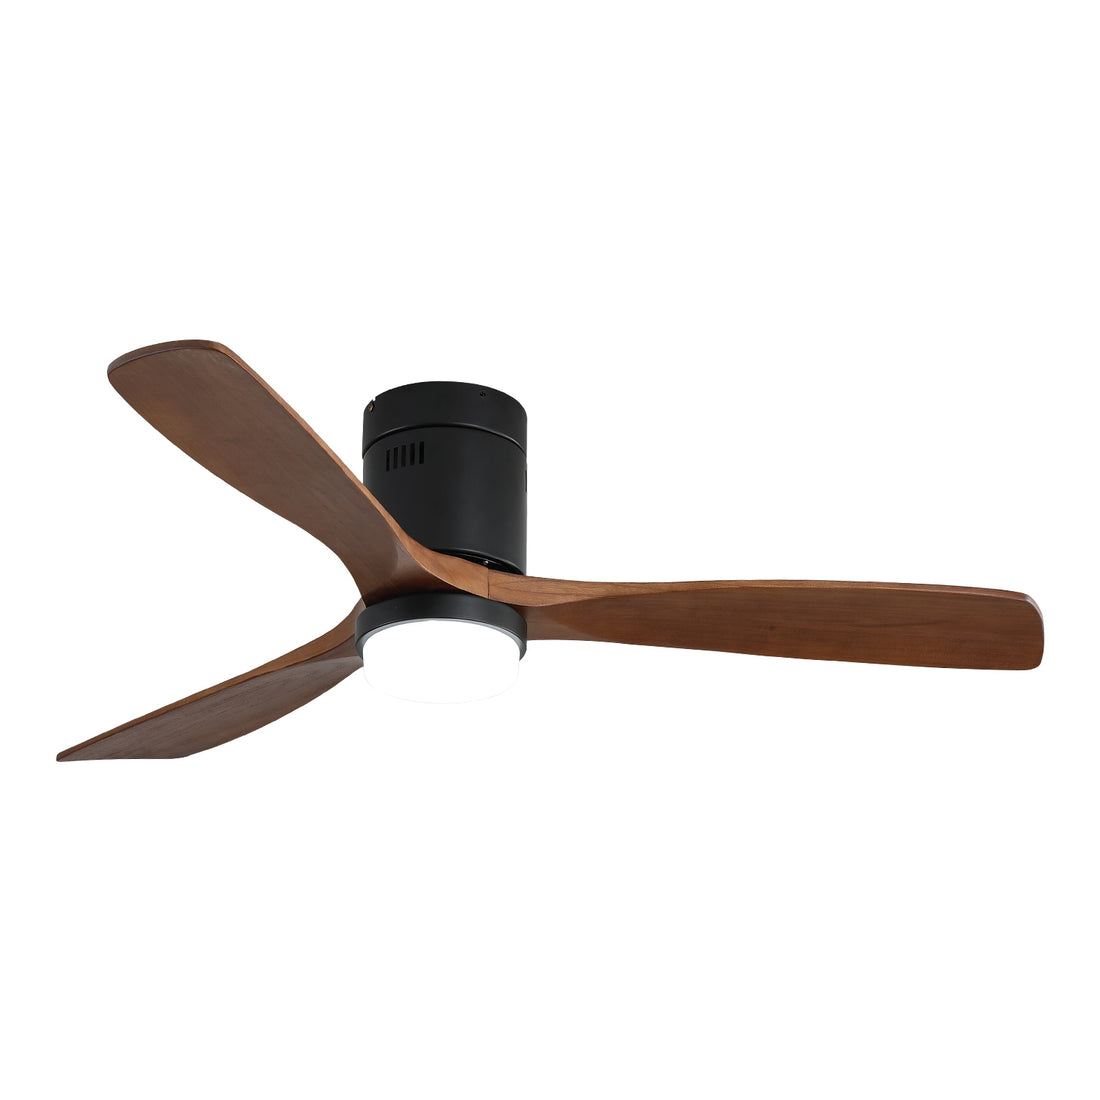 52 Inch Wooden Ceiling Fan, With 18W Led Light 3 Solid black-metal & wood